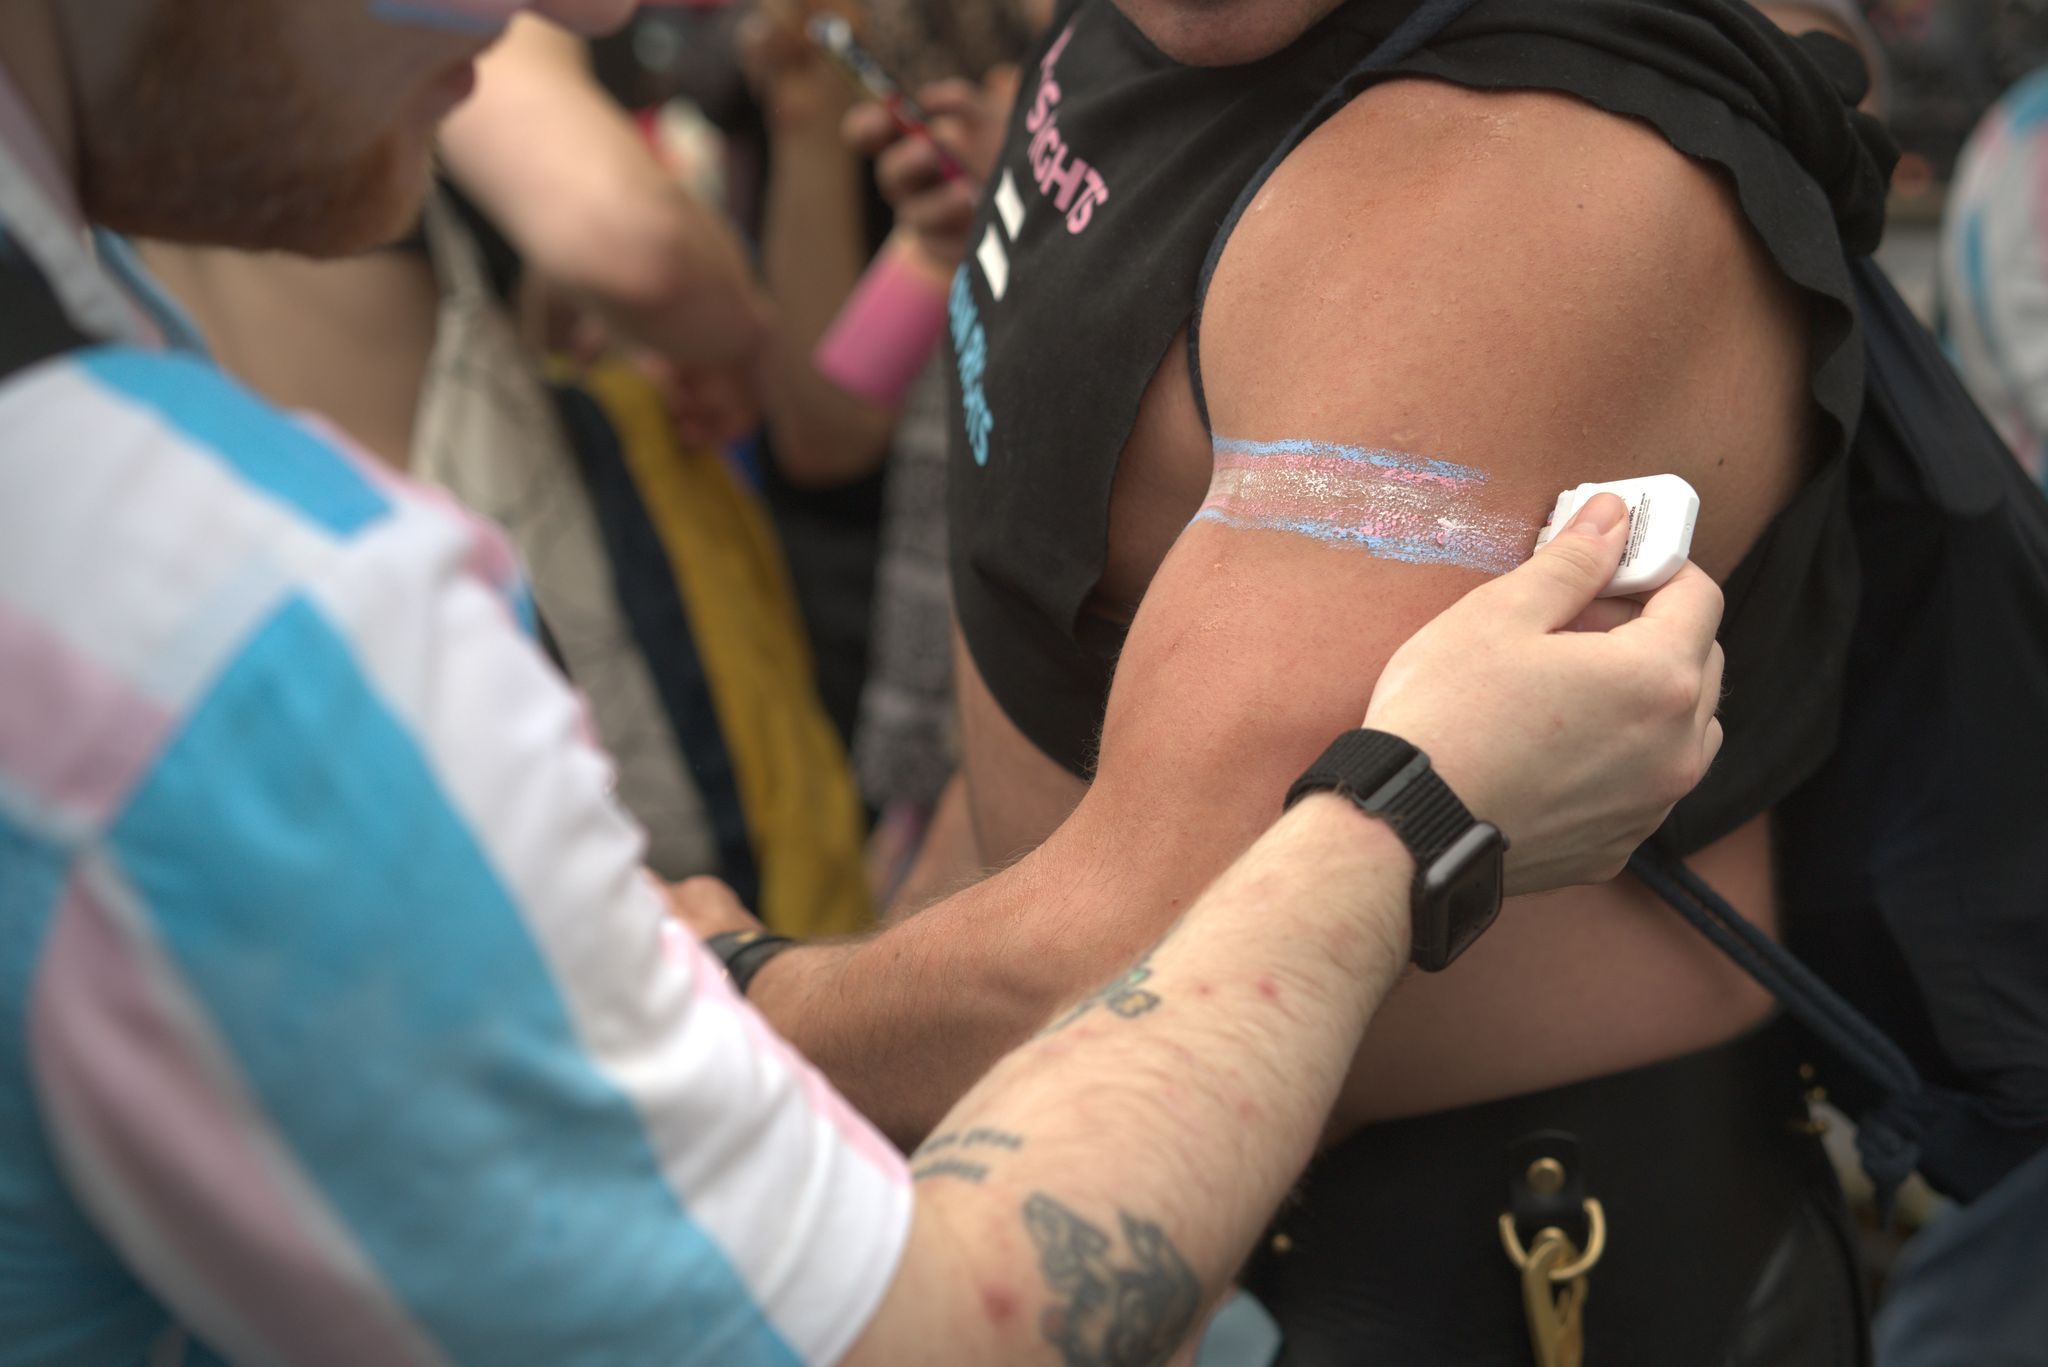 Someone paints trans flag on arm